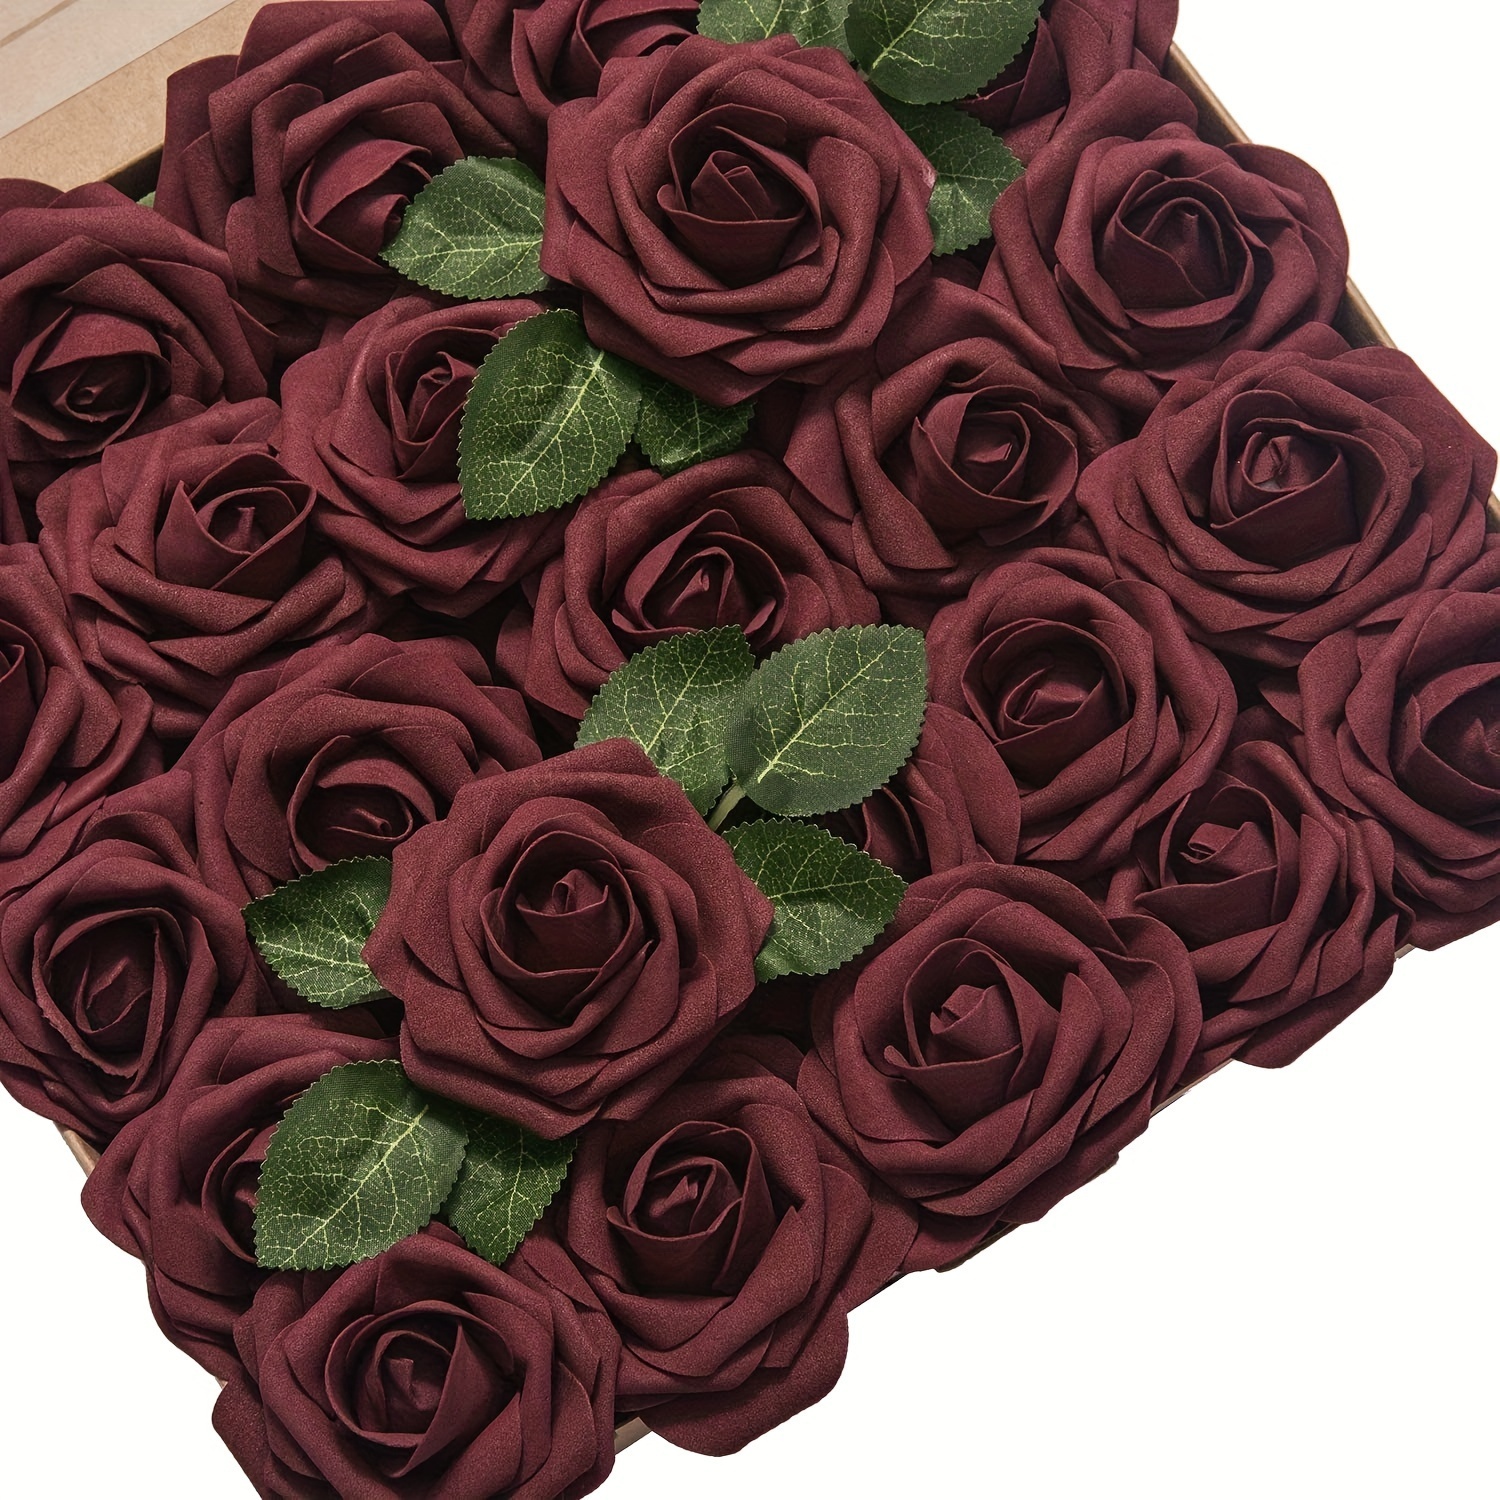 

25pcs Burgundy Artificial Roses: Perfect For Vintage Weddings, Diy Crafts, Outdoor Parties & More!